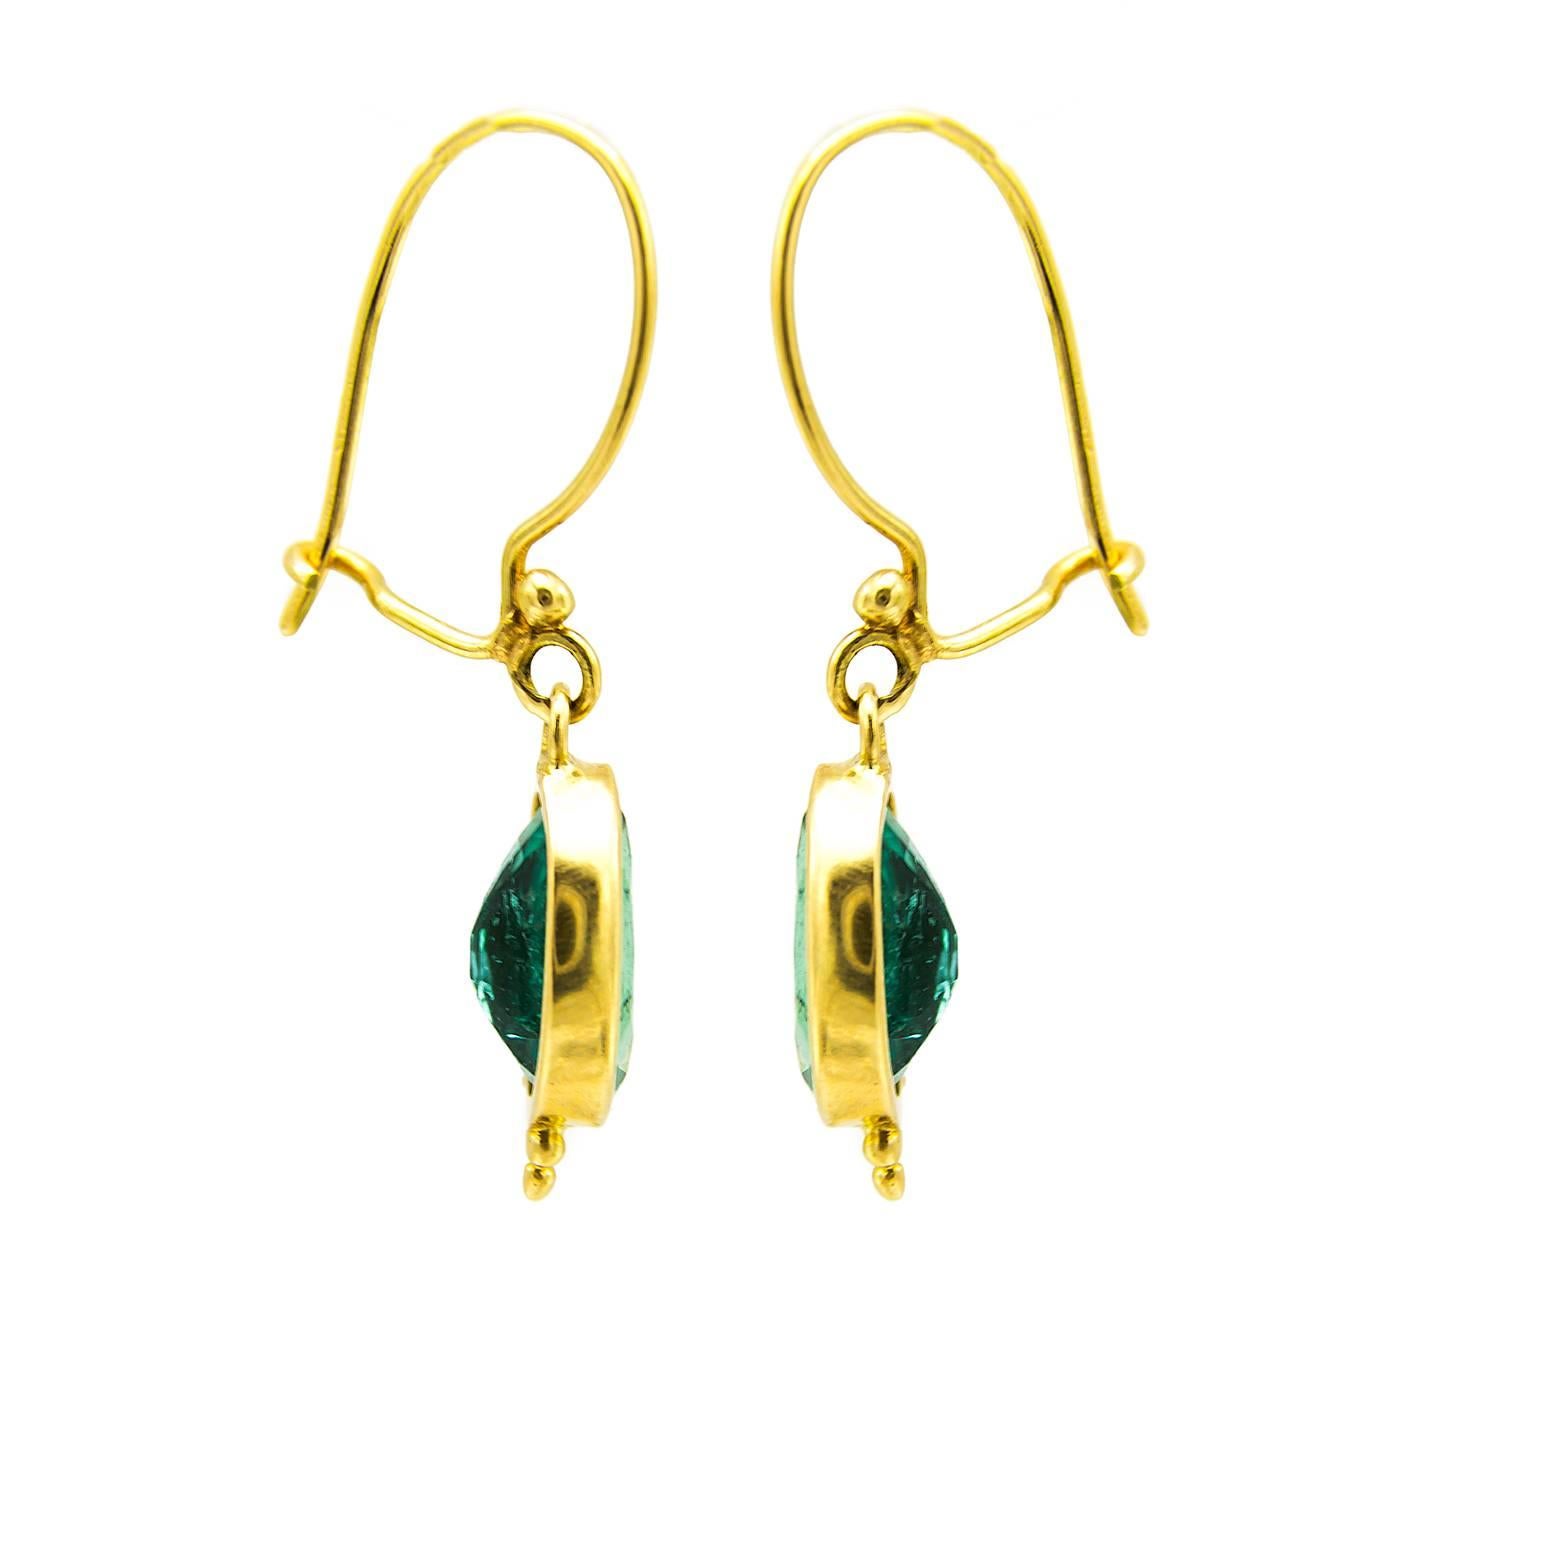 These gorgeous green oval old mine cut emerald green earrings are dainty and delightful. A substantial weight (3.9 carats total). The 18K yellow gold wire compliments these beauties while the sparkly green emeralds glow. 